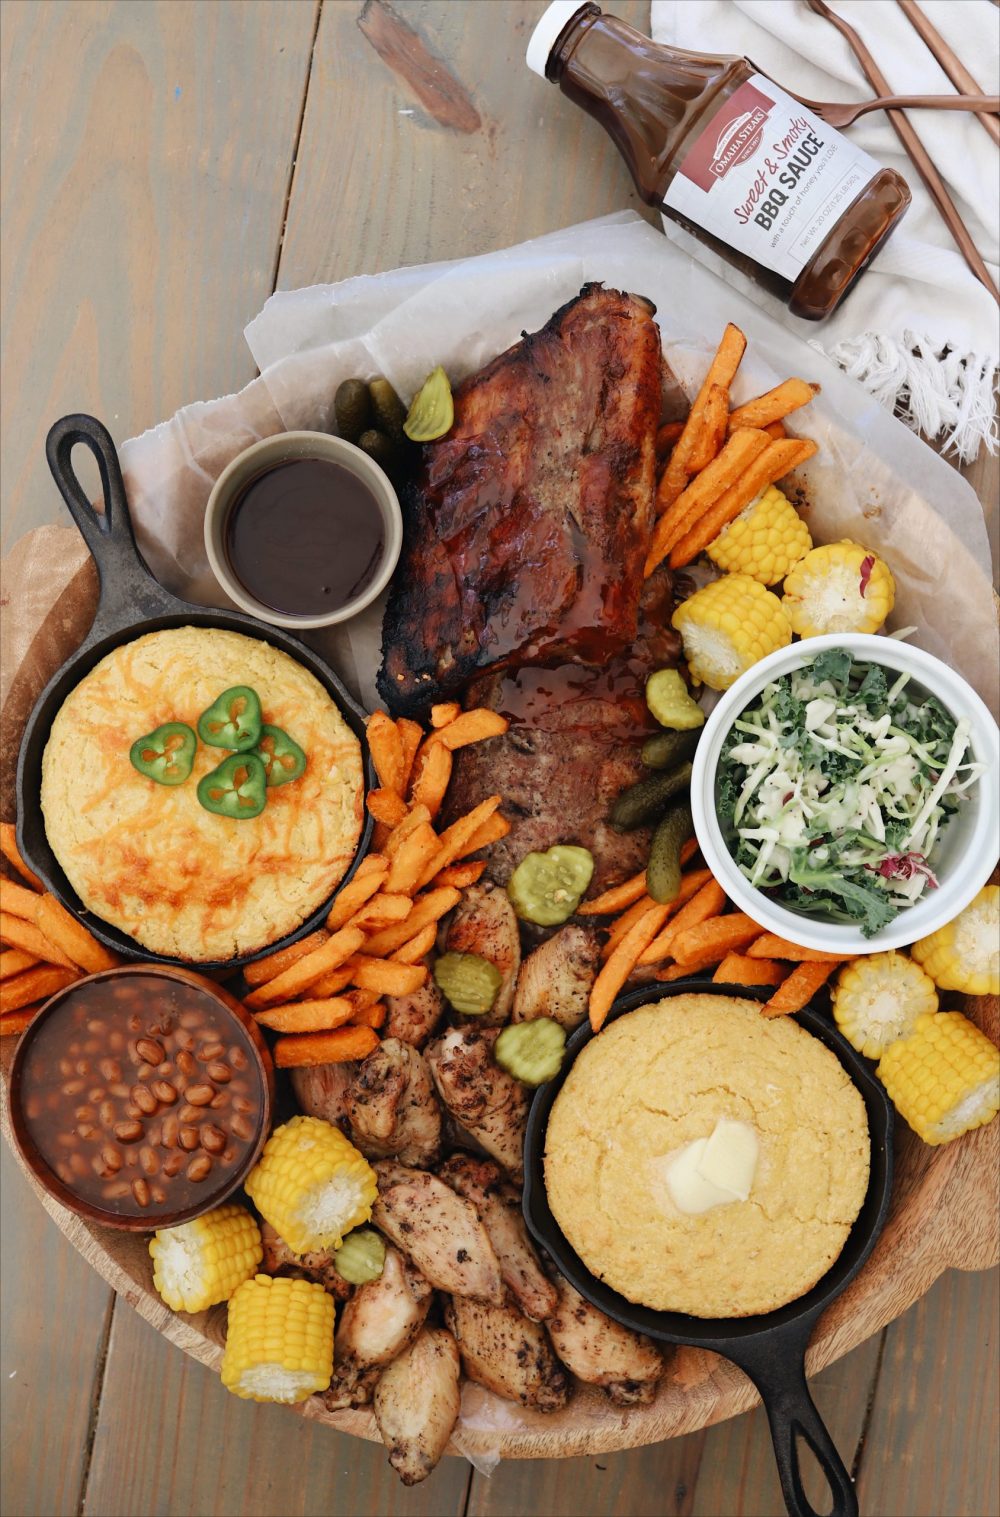 The Easiest Slow Cooker Ribs Recipe You Will Ever Make for tender fall off the bone ribs! |Slow Cooker Ribs by popular Florida lifestyle blog, Fresh Mommy Blog: image of slow cooker ribs on a wooden tray with sweet potato fries, corn on the cob, skillet corn bread, chicken wings, and a white ceramic dish of coleslaw. 